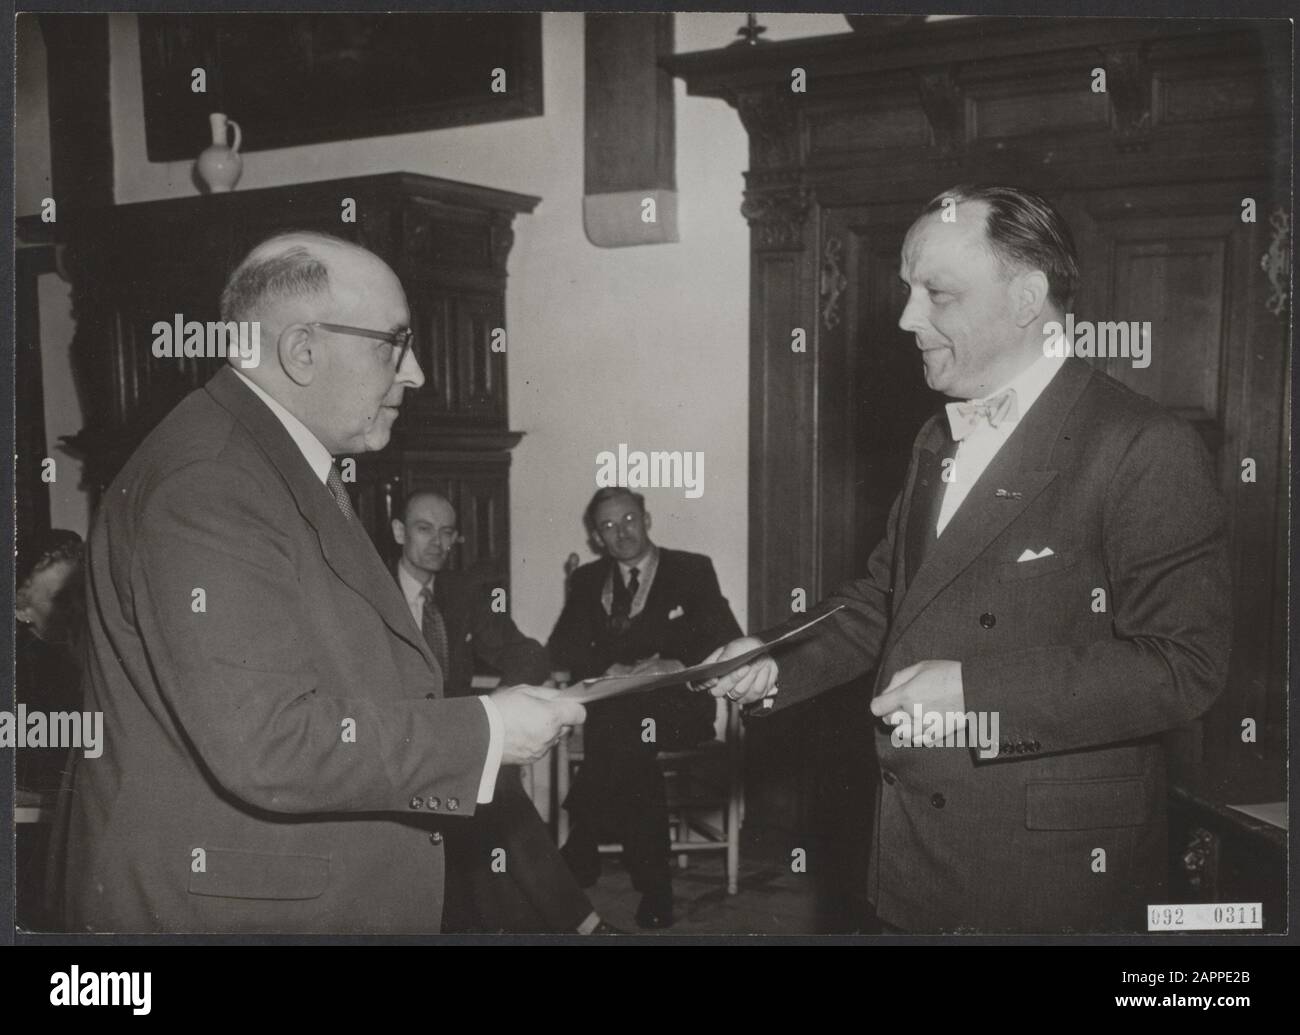 Award of State Prize for Literature, the P.C. Hoot-Prize 1952 in the Muiderslot in Muiden to mr. J. C. Bloem (left) by mr. H. J. Reinink, Secretary-General of the Department of Education, Arts and Sciences for his poetry collection Evening Date: 21 May 1953 Location: Muiden Keywords: authors, literature, awards personname: Bloem J.C., Reinink, H.J. Institution name: P.C. Hootprijs Stock Photo